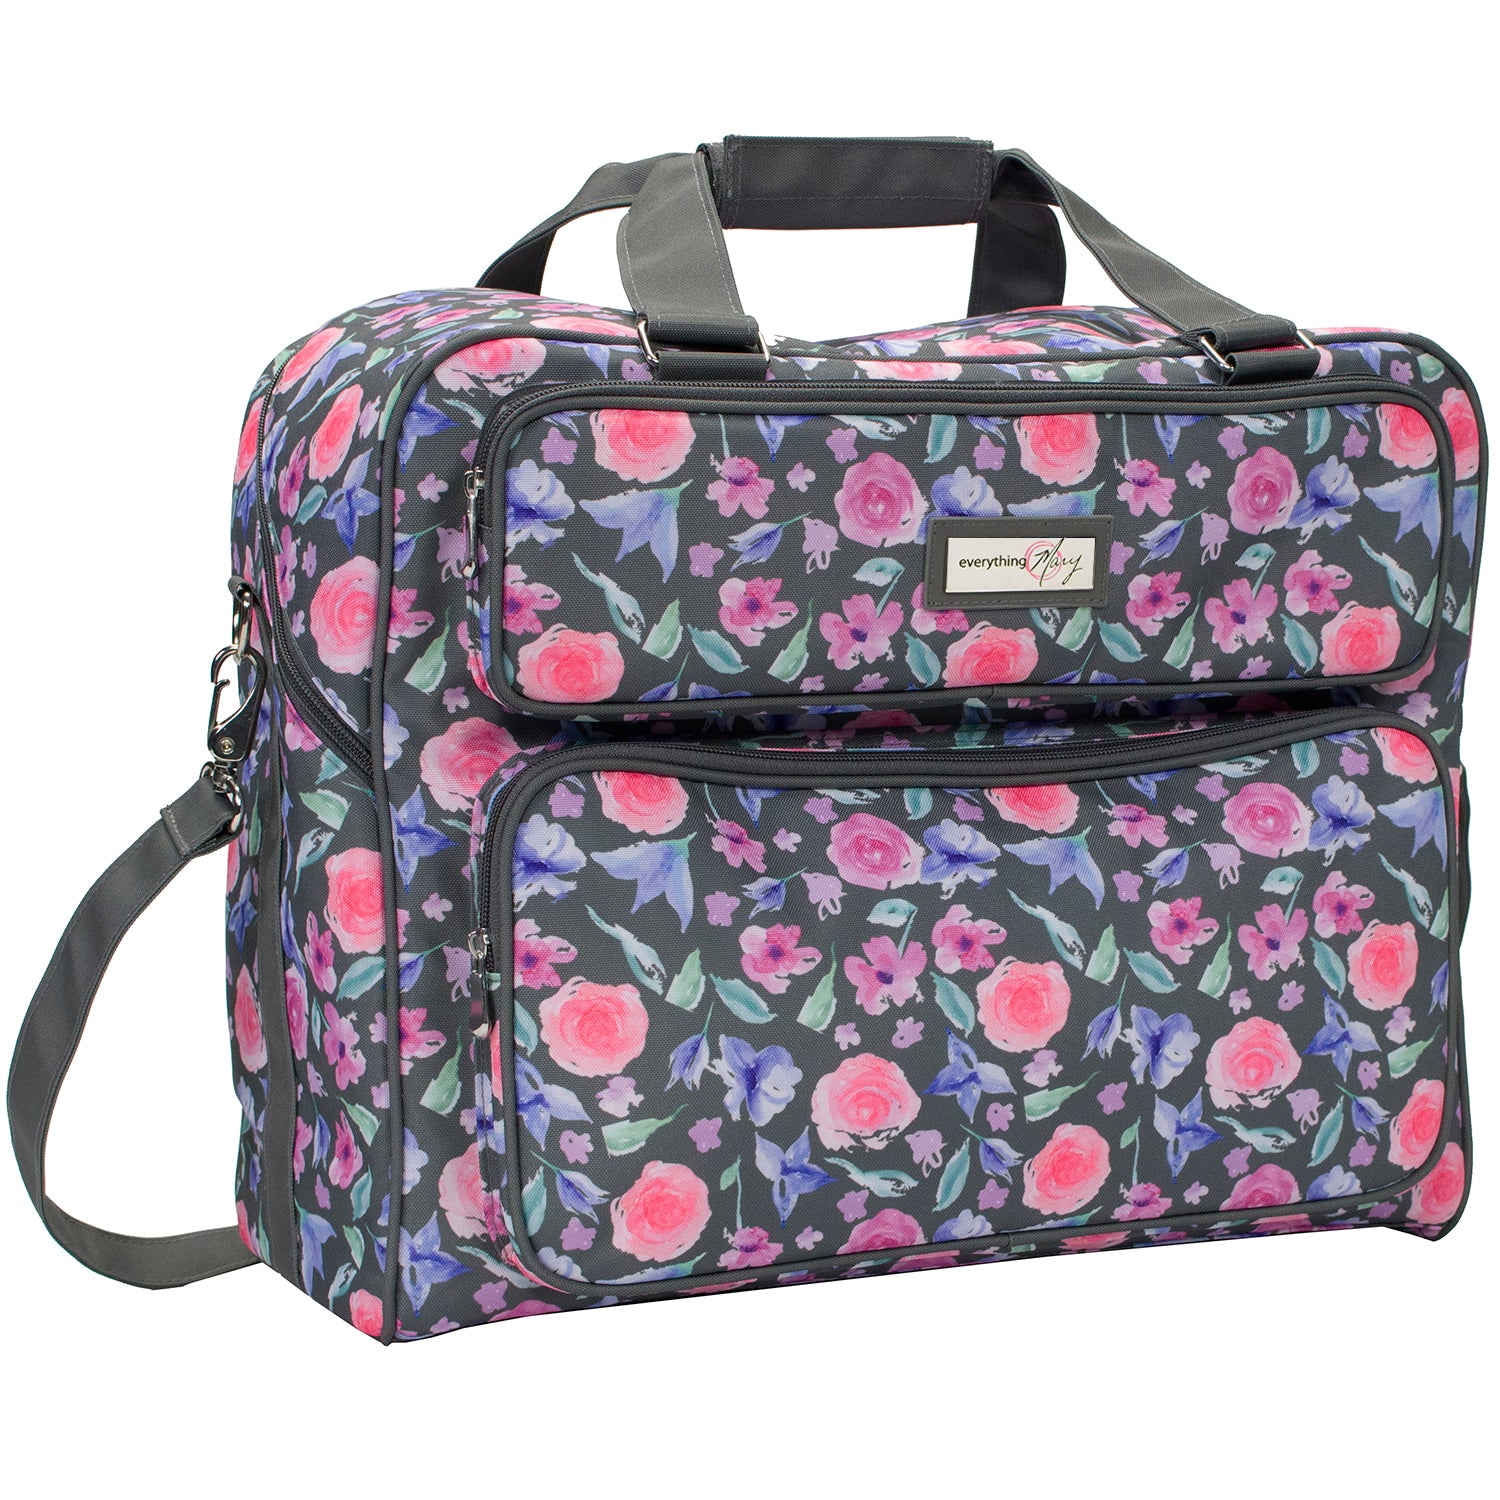 Everything Mary Collapsible Teal Floral Print Rolling Sewing Machine Tote, Michaels